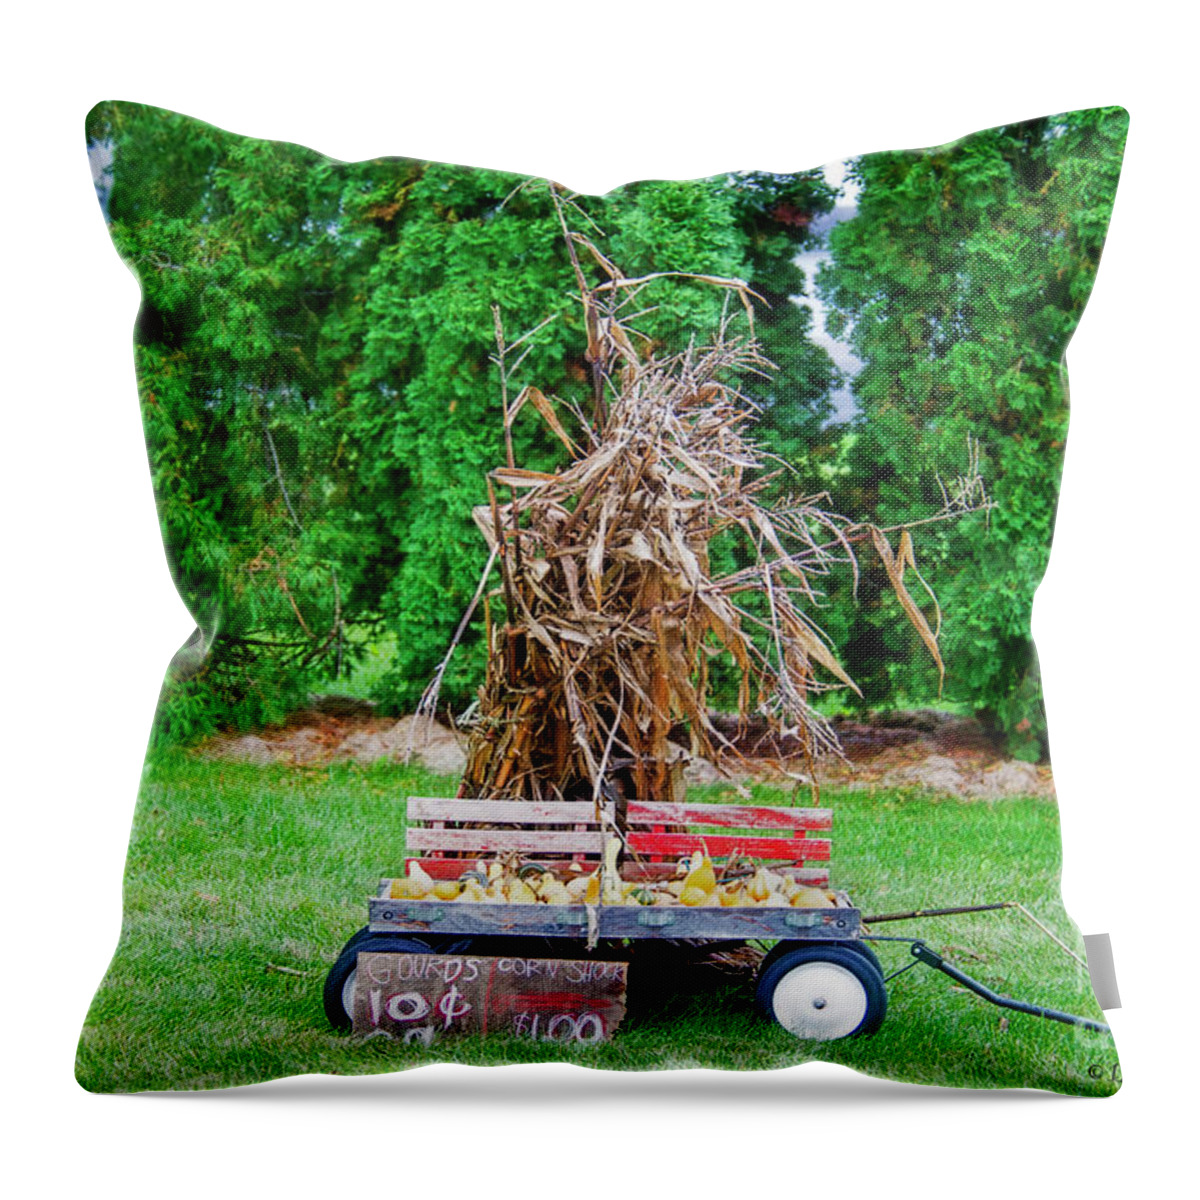 Fall Throw Pillow featuring the photograph Fall Gourds and Corn Shocks by David Arment